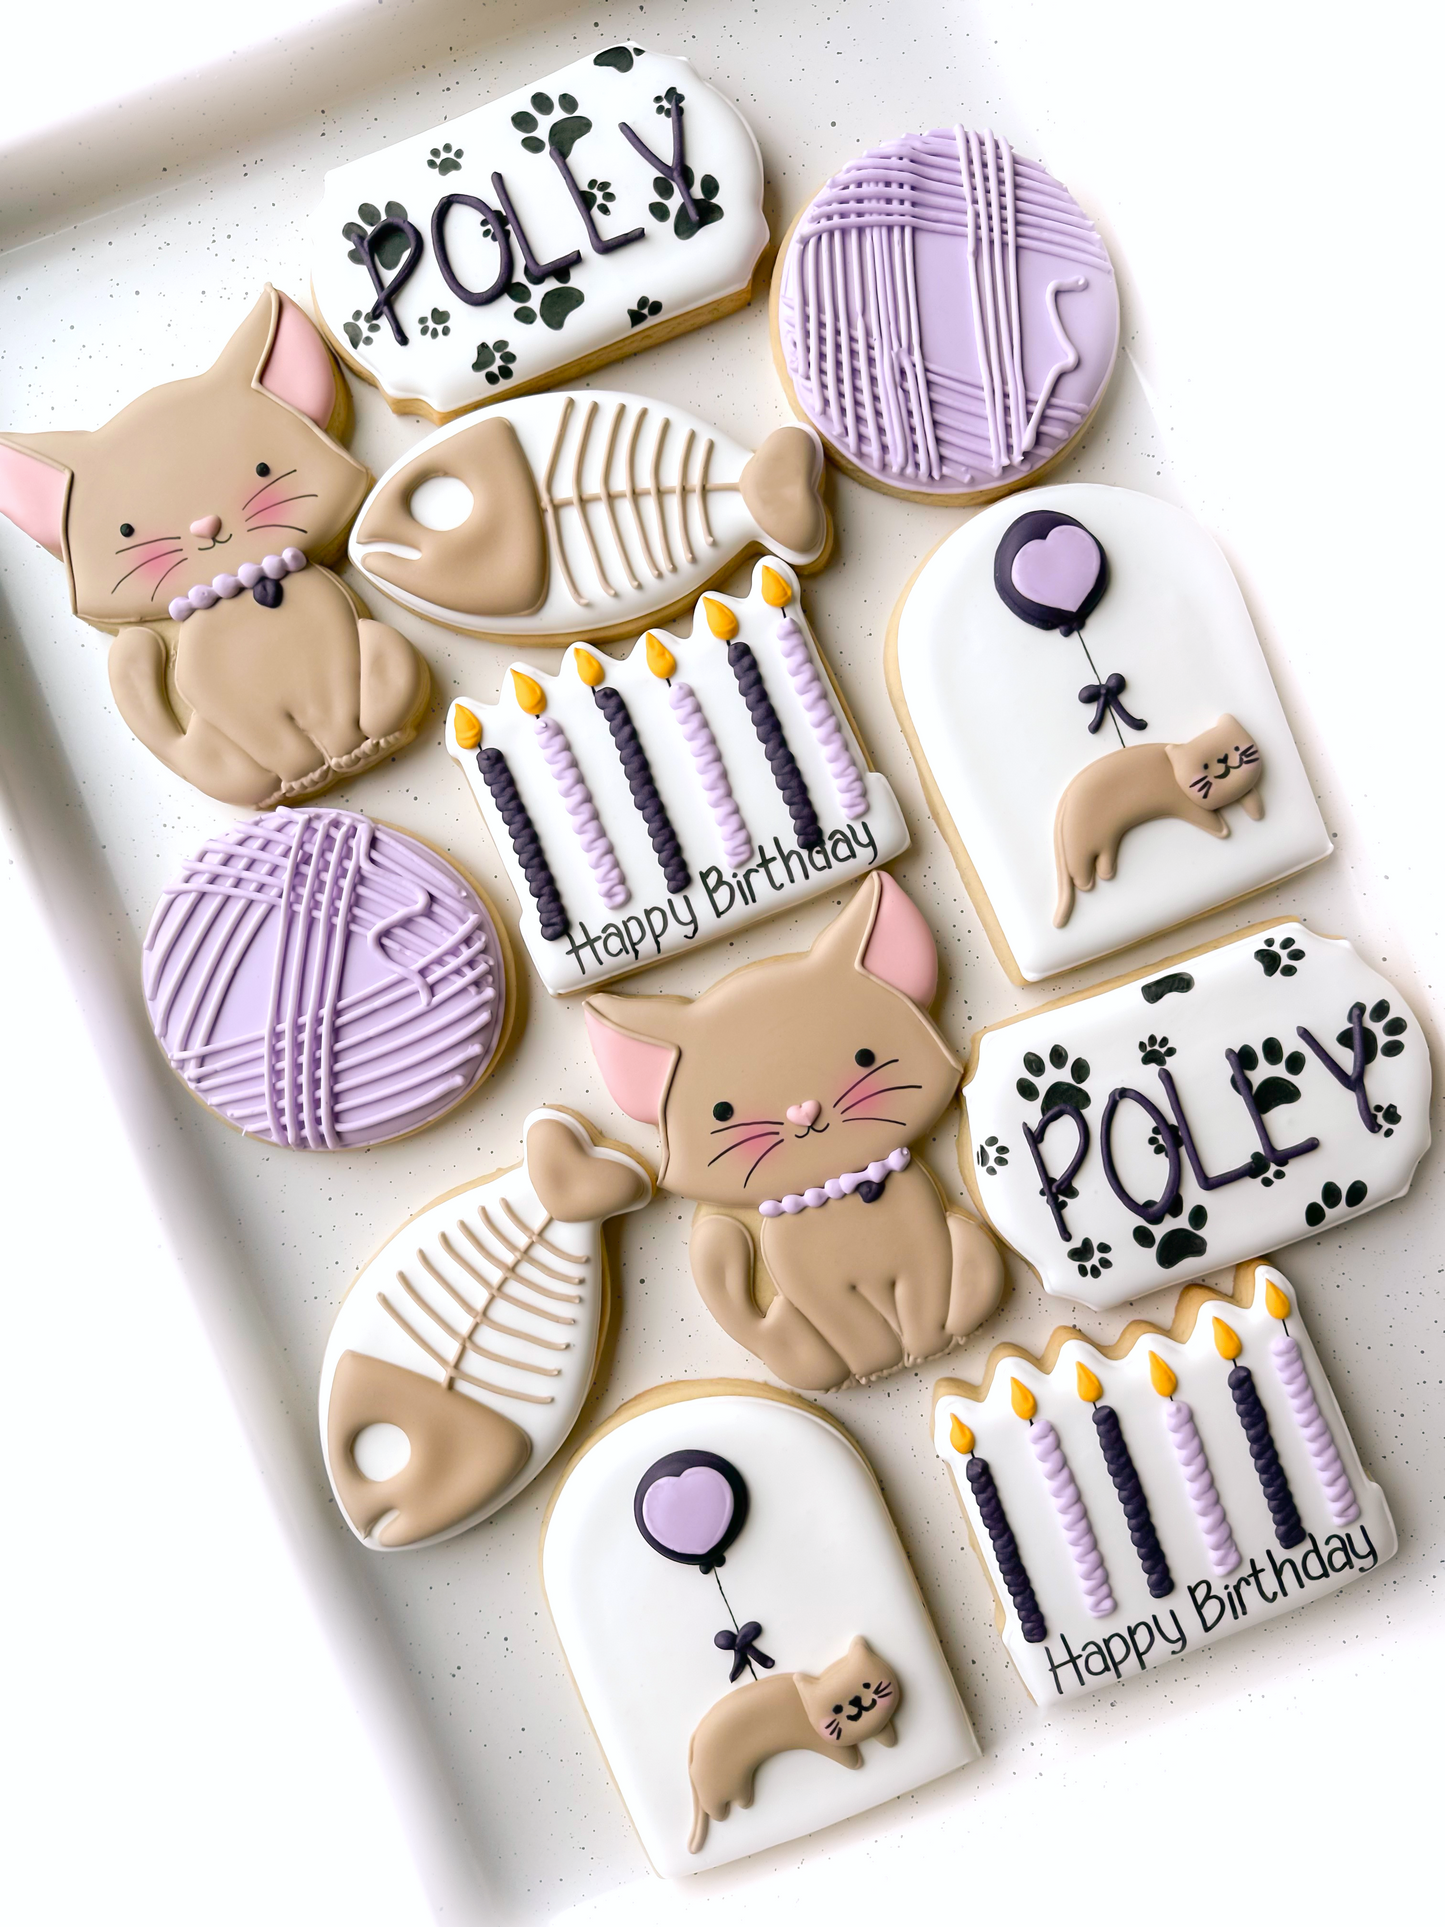 cat, fish bones, ball of yarn, birthday candles, cat with balloon, name plate, age plate